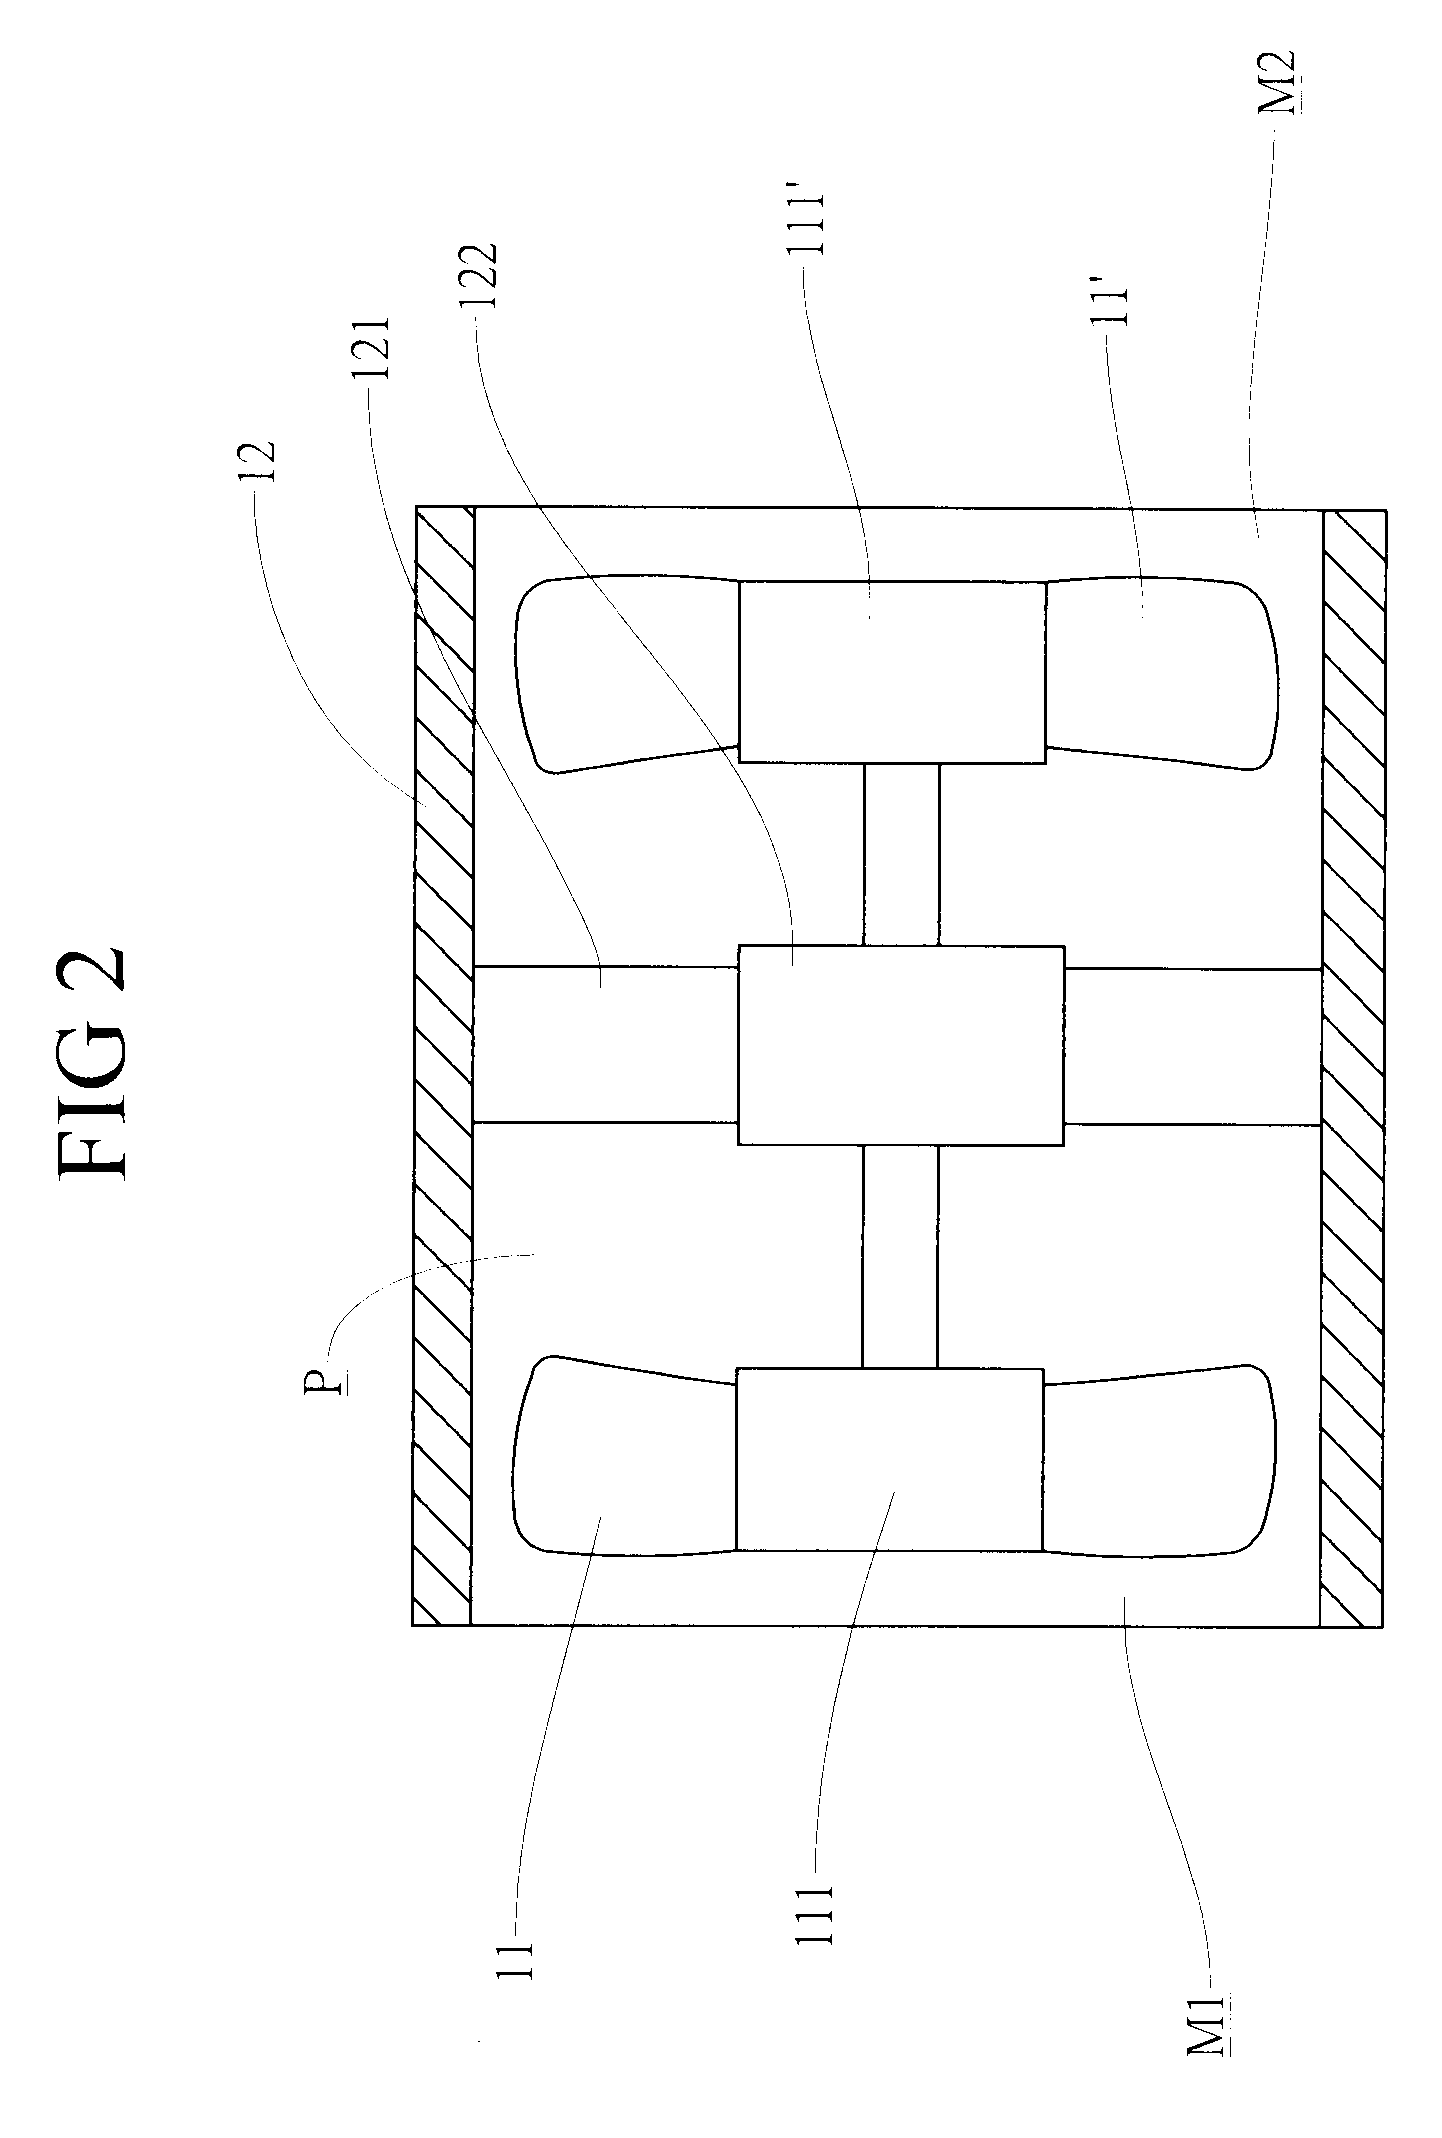 Fan device capable of increasing air pressure and air supply